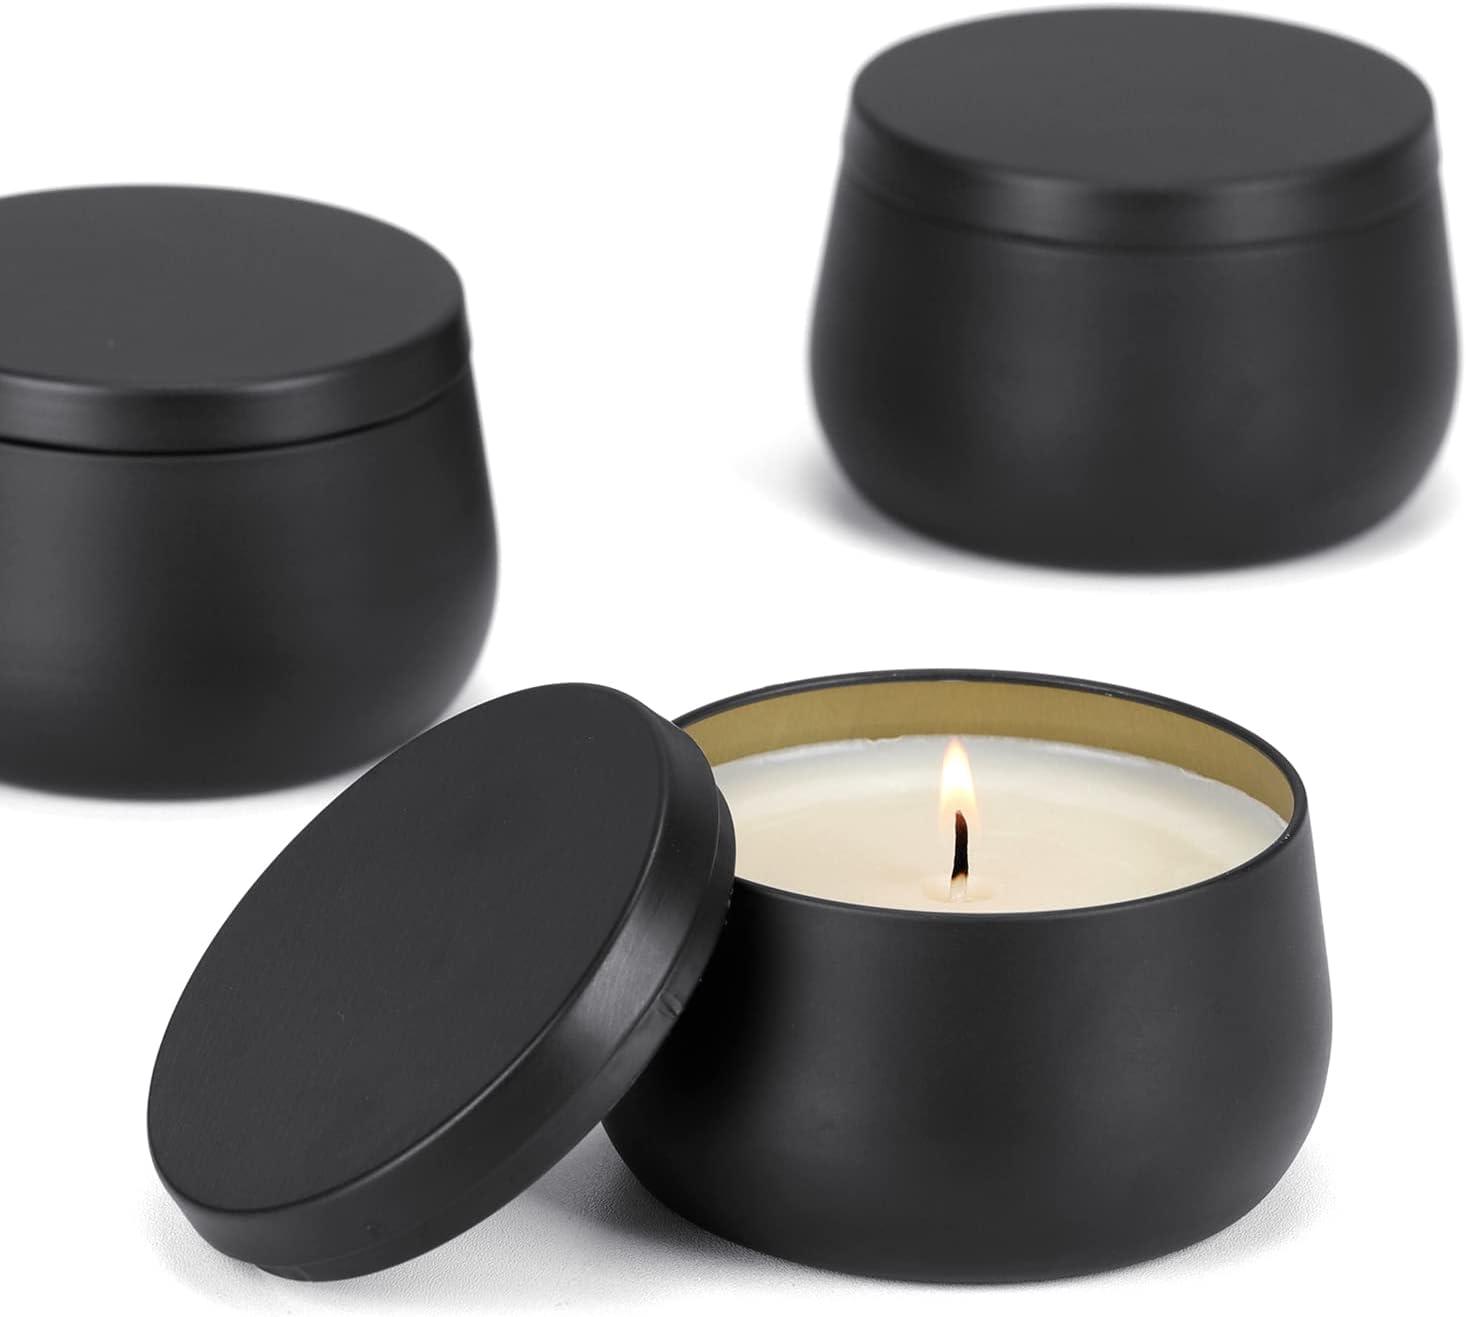 24pcs 4oz Black Candle Tins for Making Candles,Bulk Candle Jars for DIY Candle  Making, Arts & Crafts, Storage, Gifts, and More - Candle Jars with Wood  Grain Lids